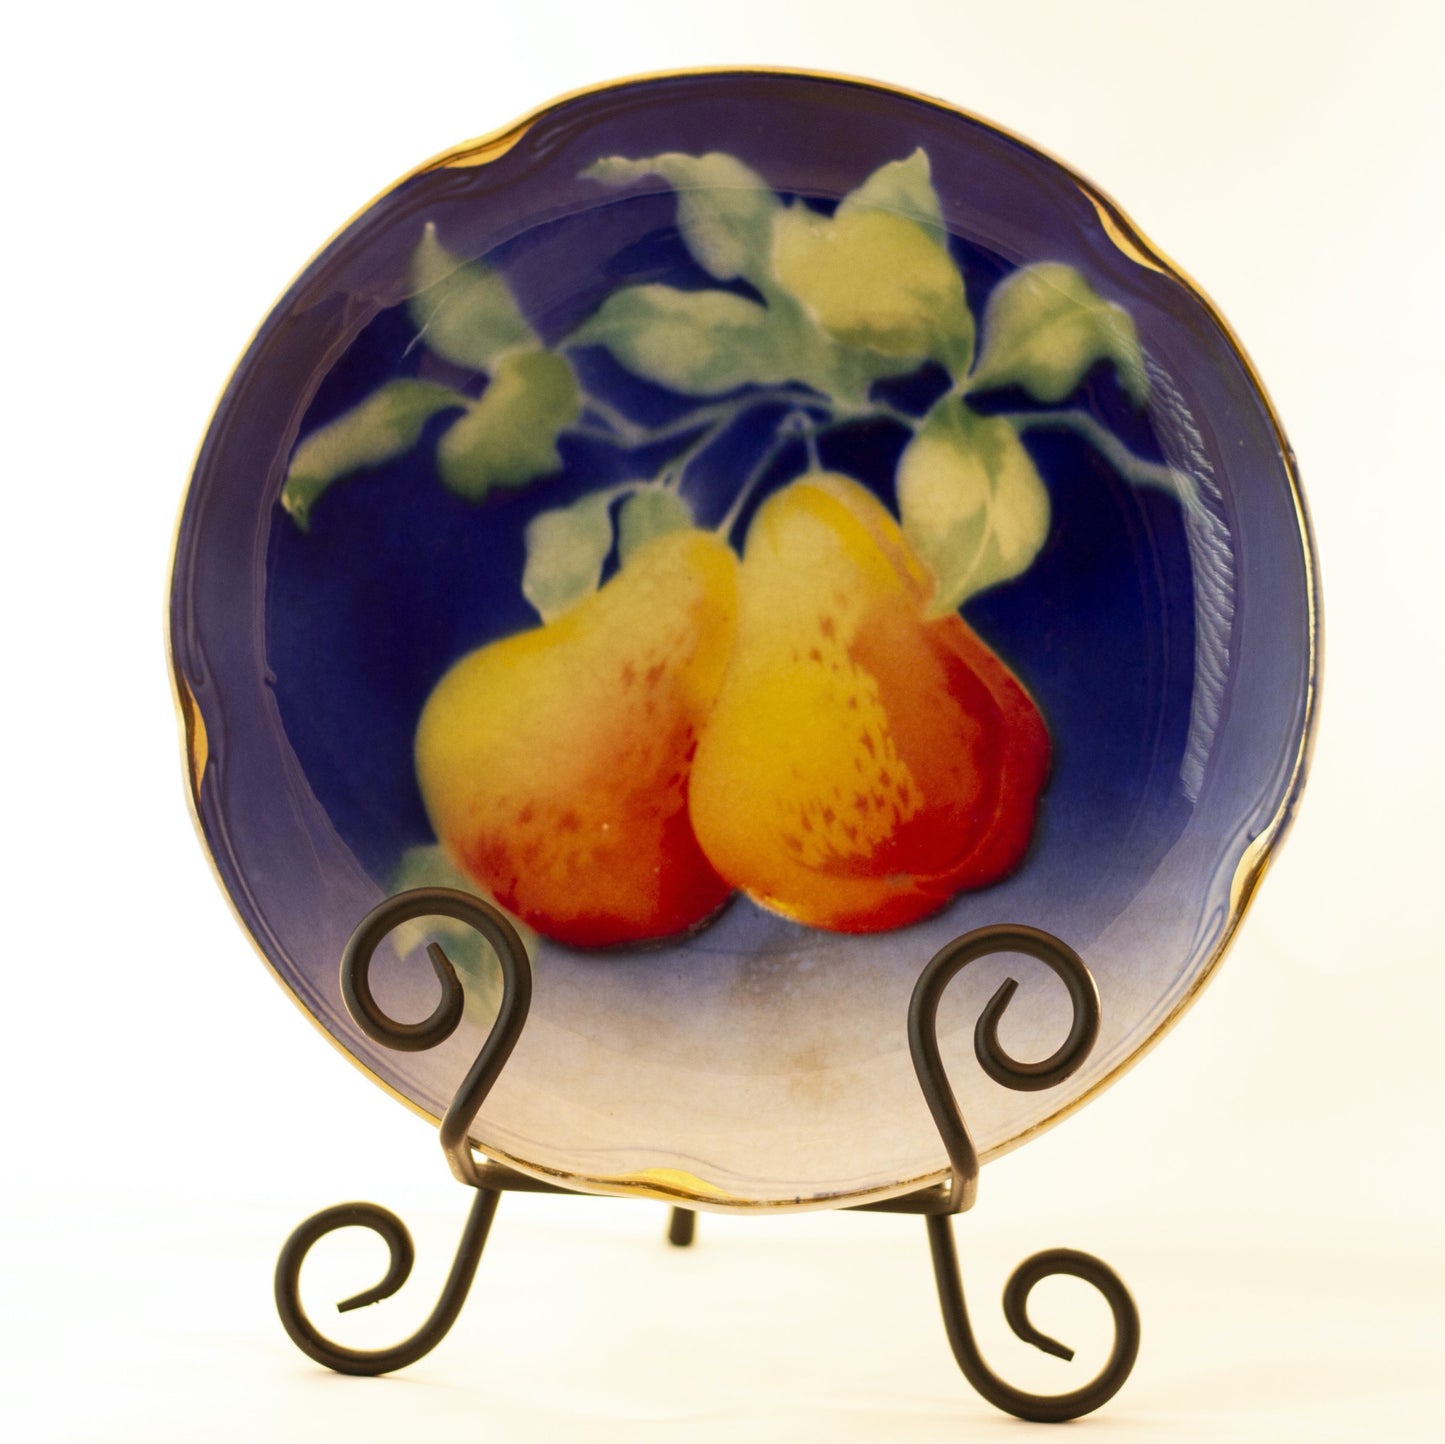 K & G LUNÉVILLE FRENCH FAIENCE PLATE HAND PAINTED PEARS 8 ½” Gold Gilt Rim Circa 1890